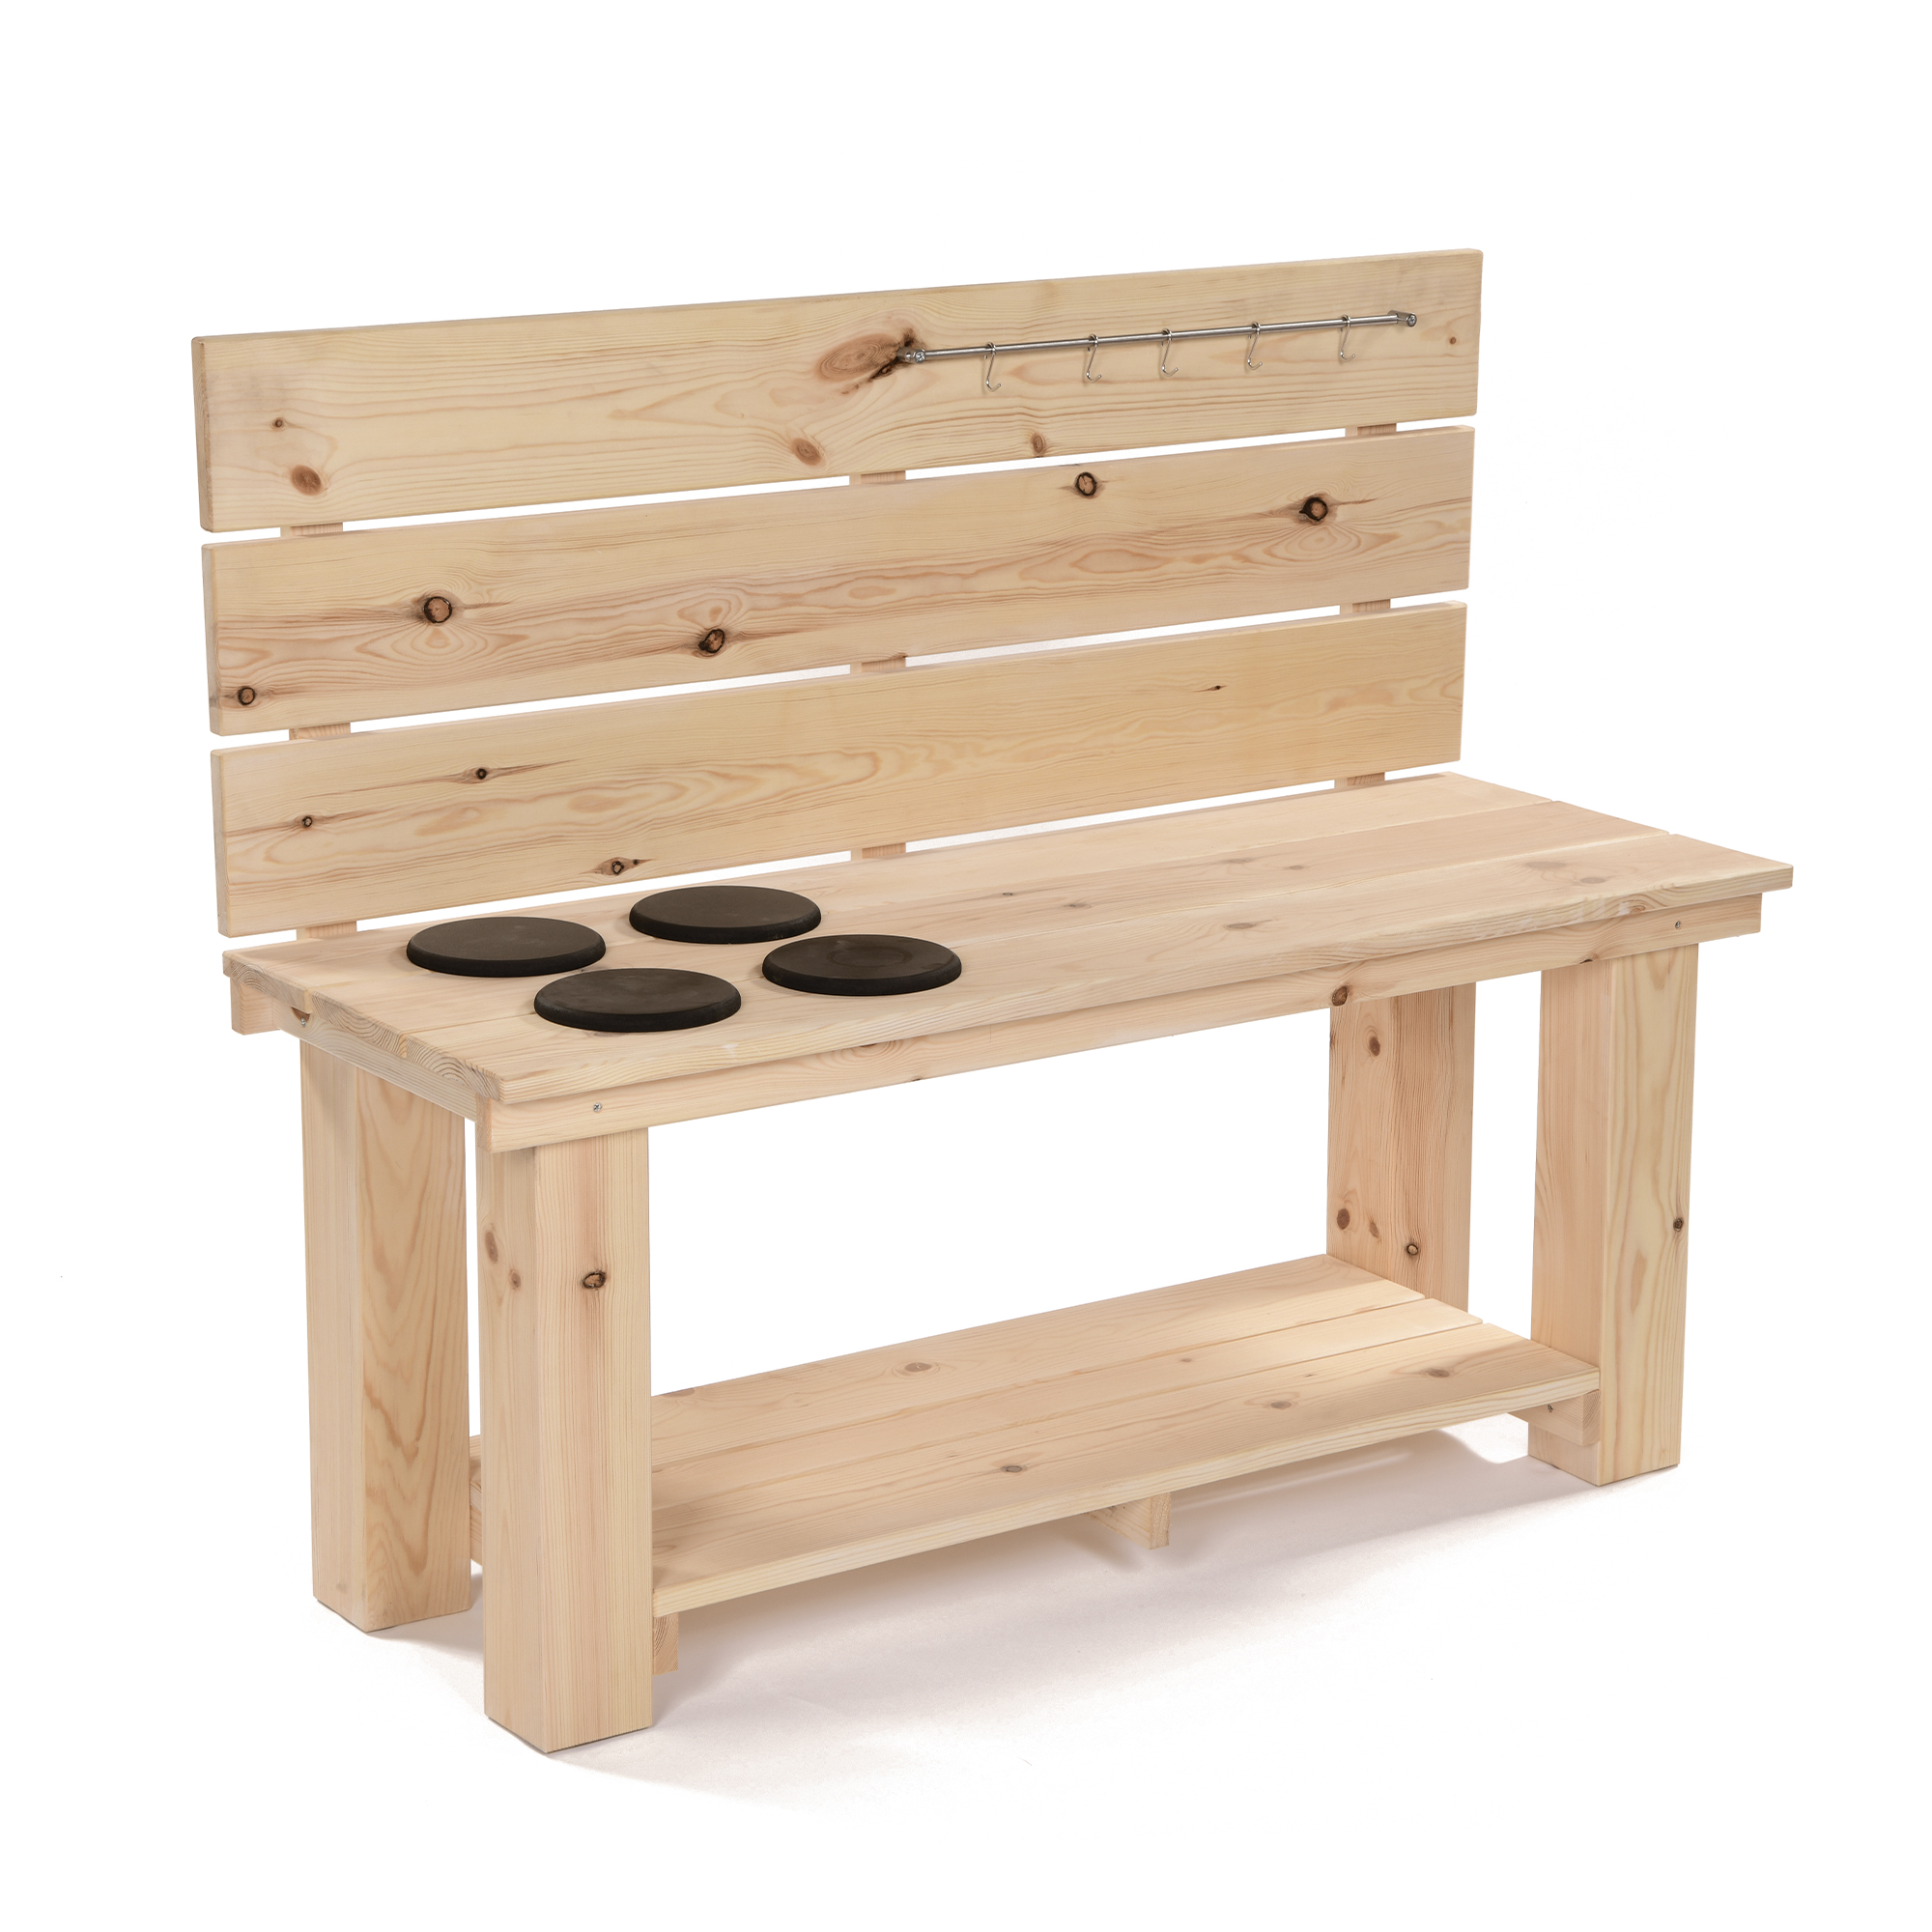 with cooker hob Mud kitchen for outdoor play 